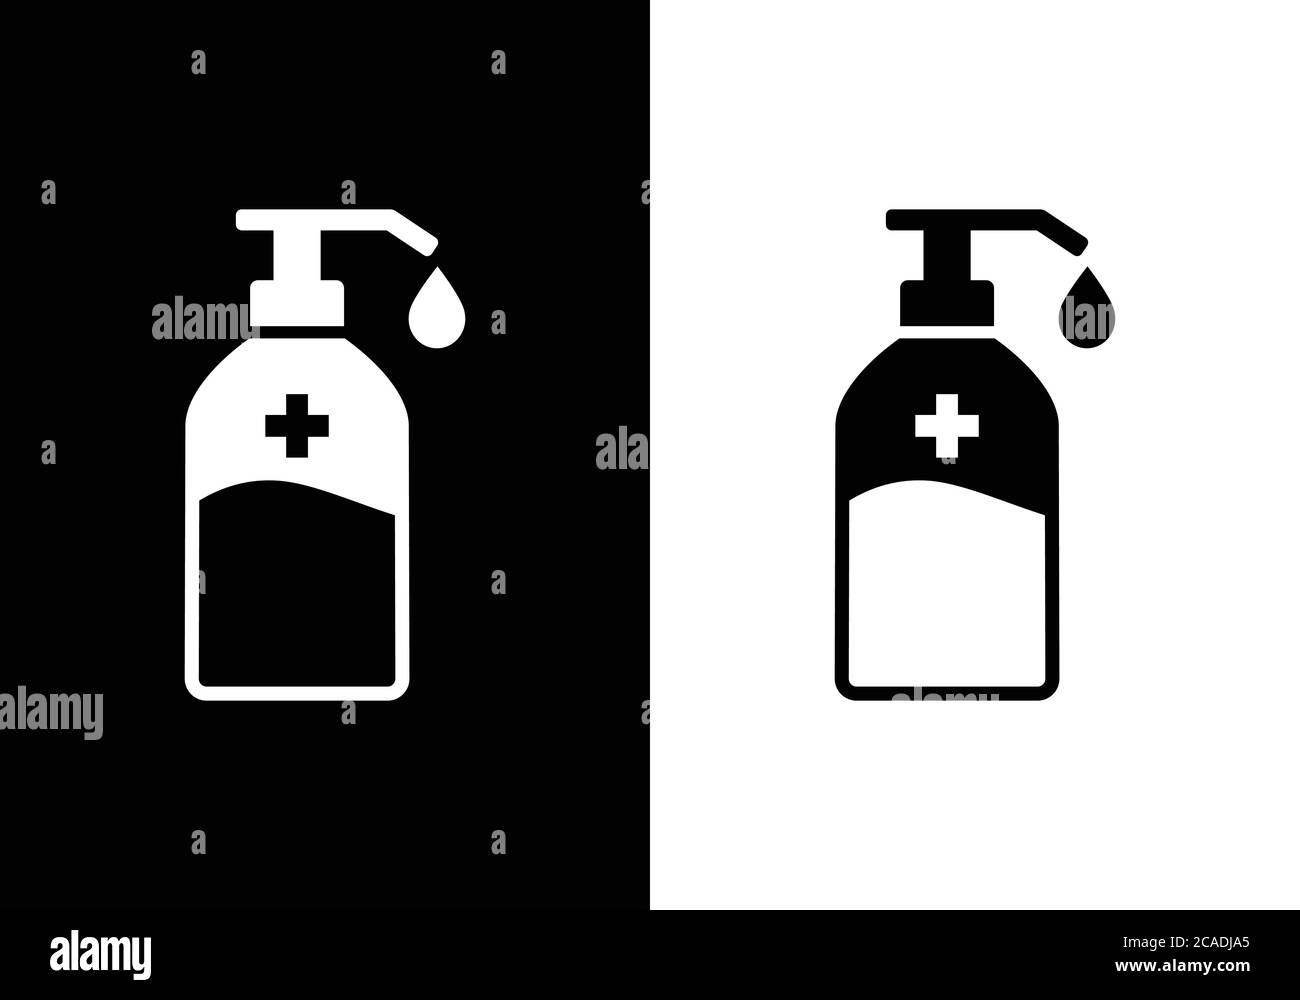 Sanitizer bottle flat vector icon for medical apps and websites Stock Vector